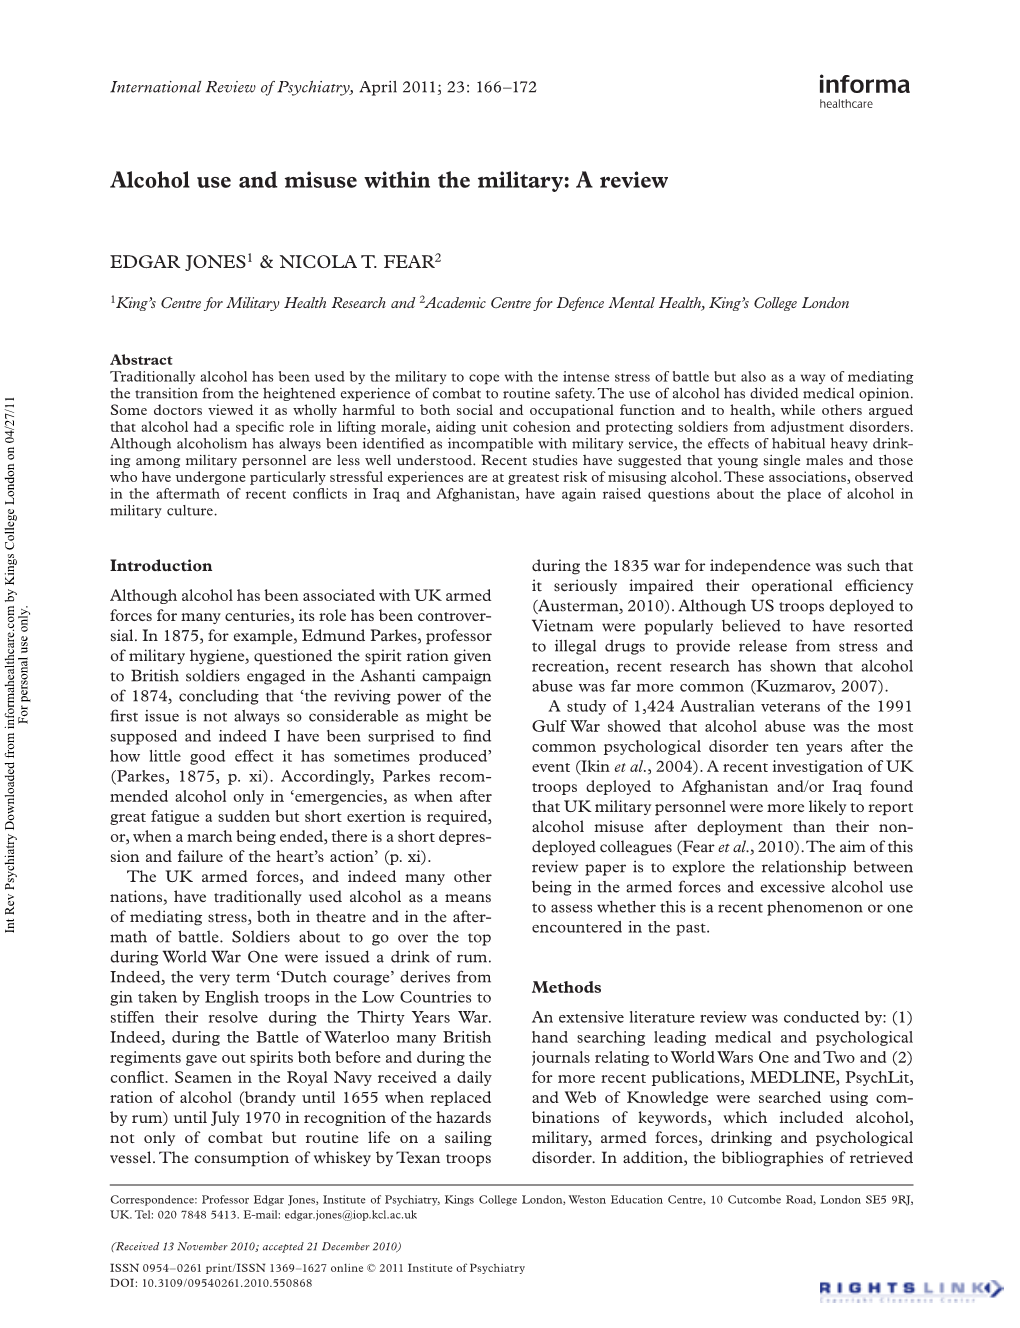 Alcohol Use and Misuse Within the Military: a Review